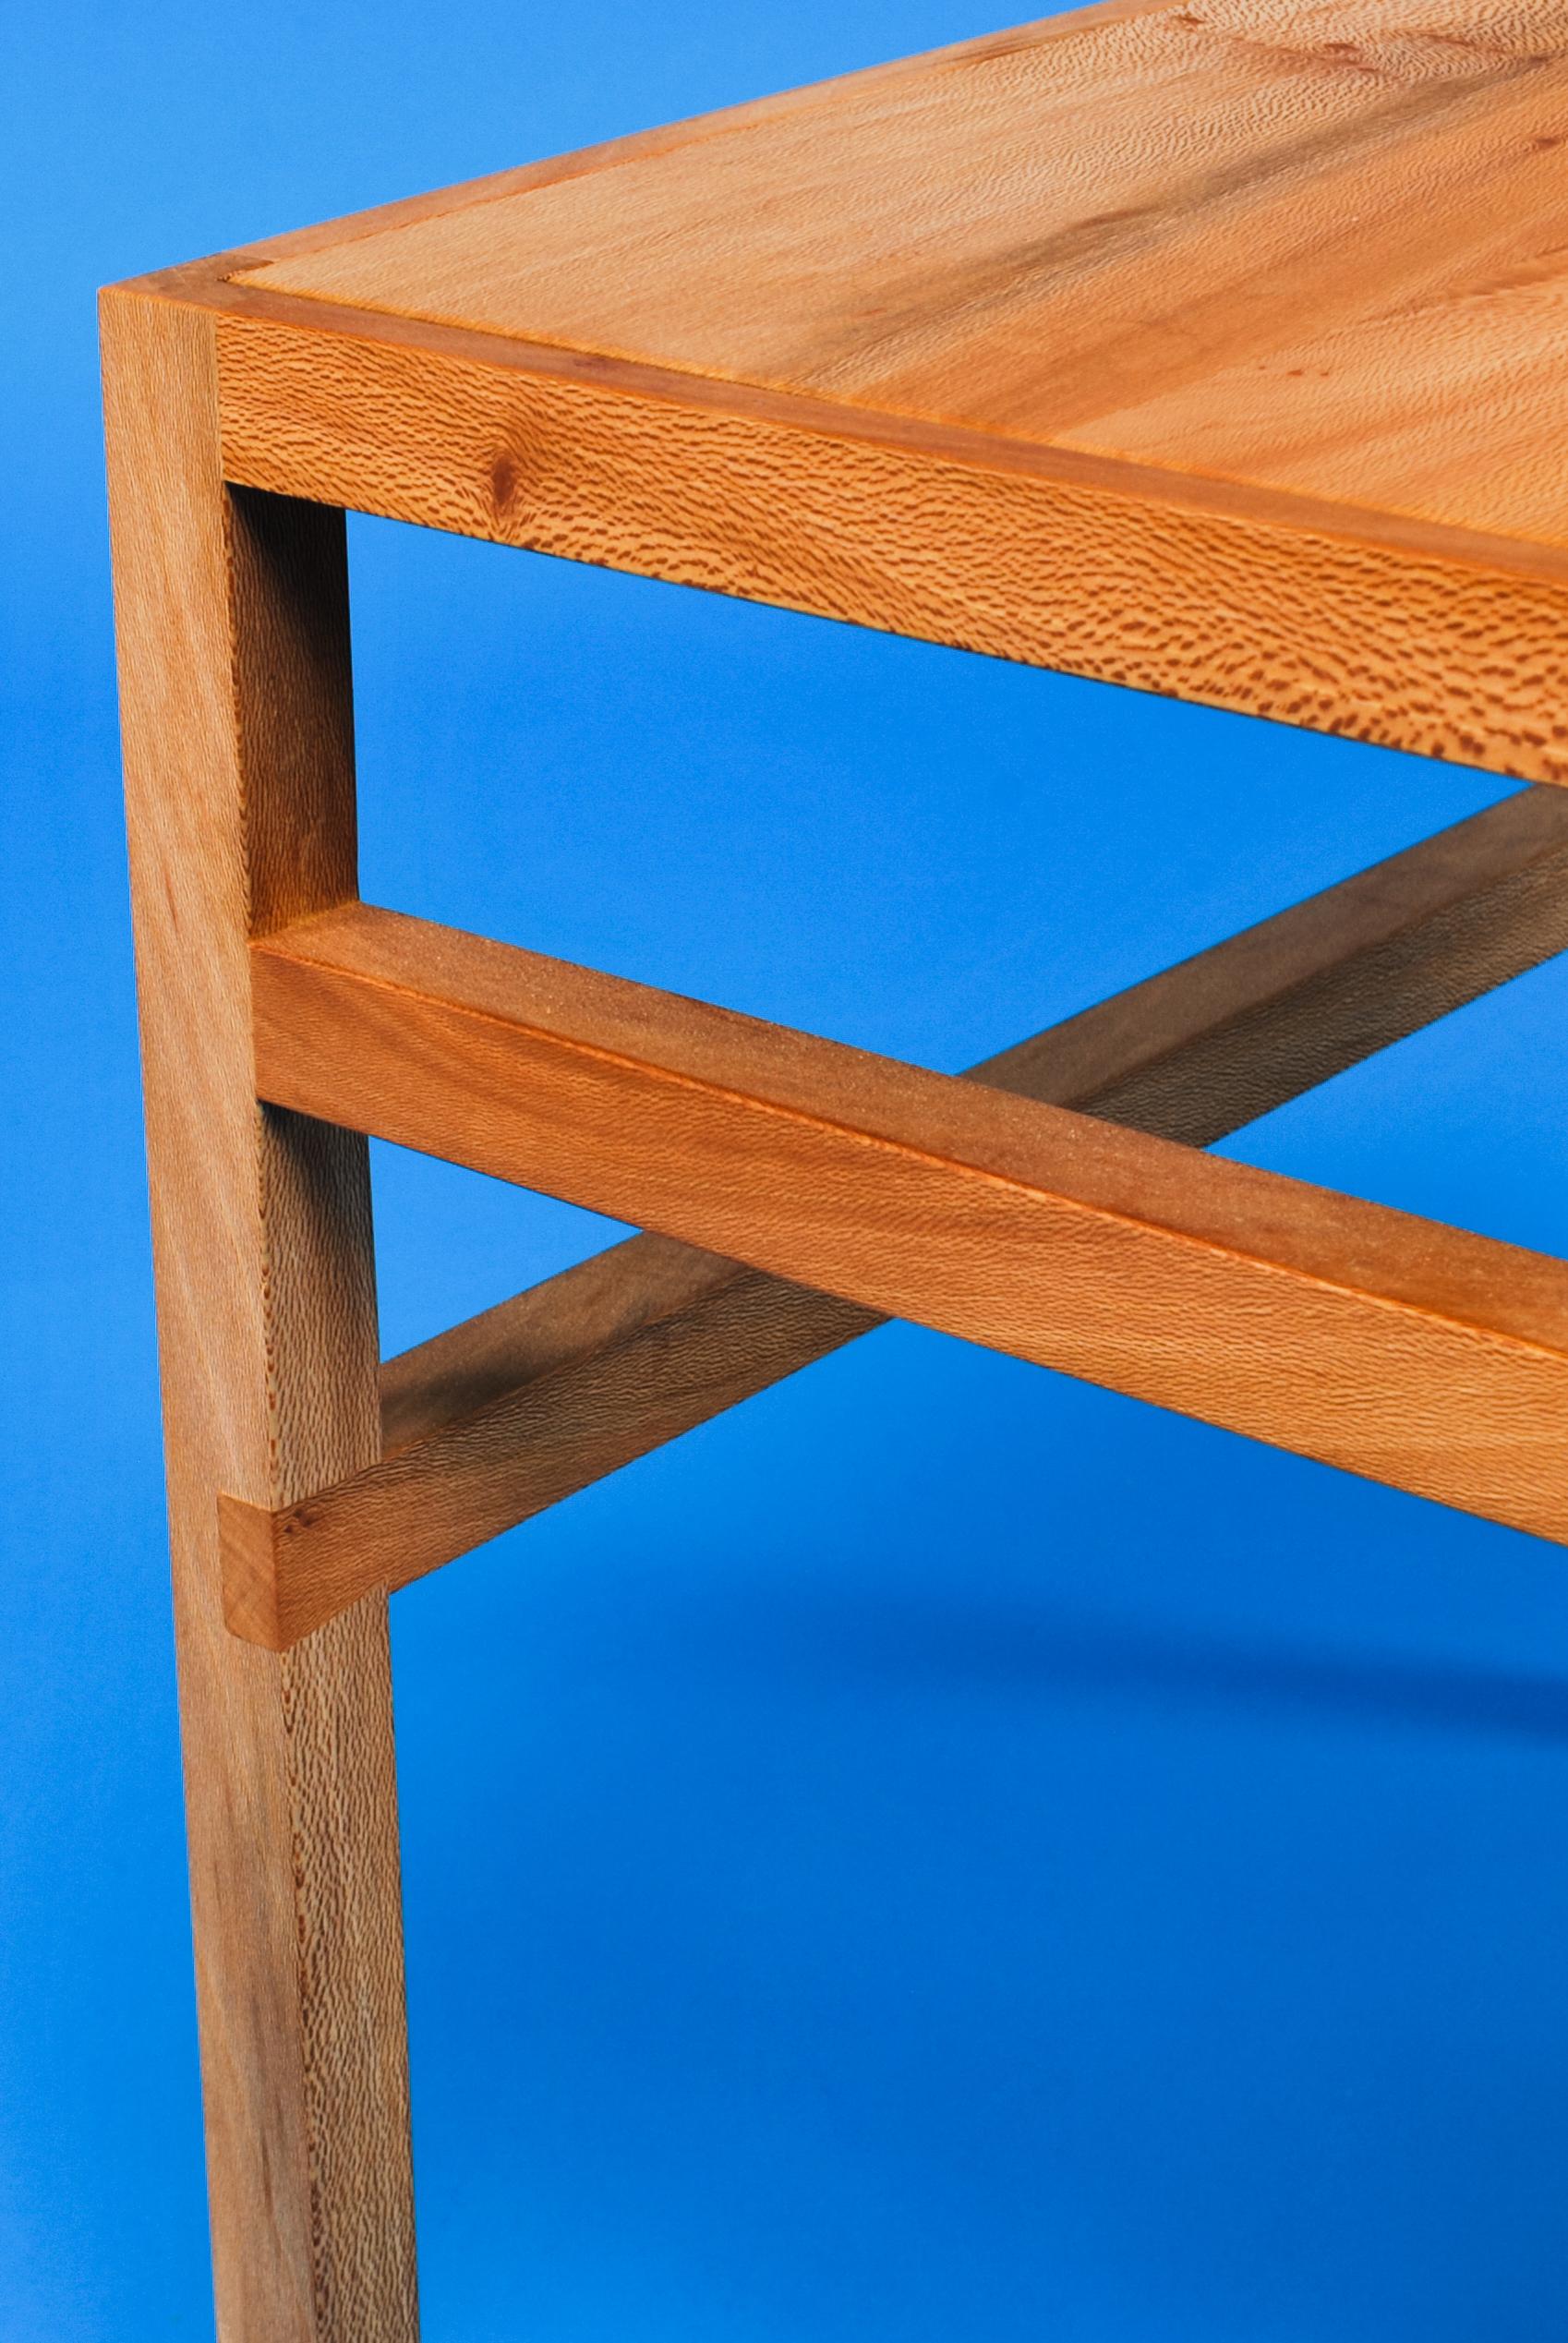 Hand-Crafted Organic Modern Dining Chair, Solid Wood, London Plane, Handmade by Loose Fit, UK For Sale